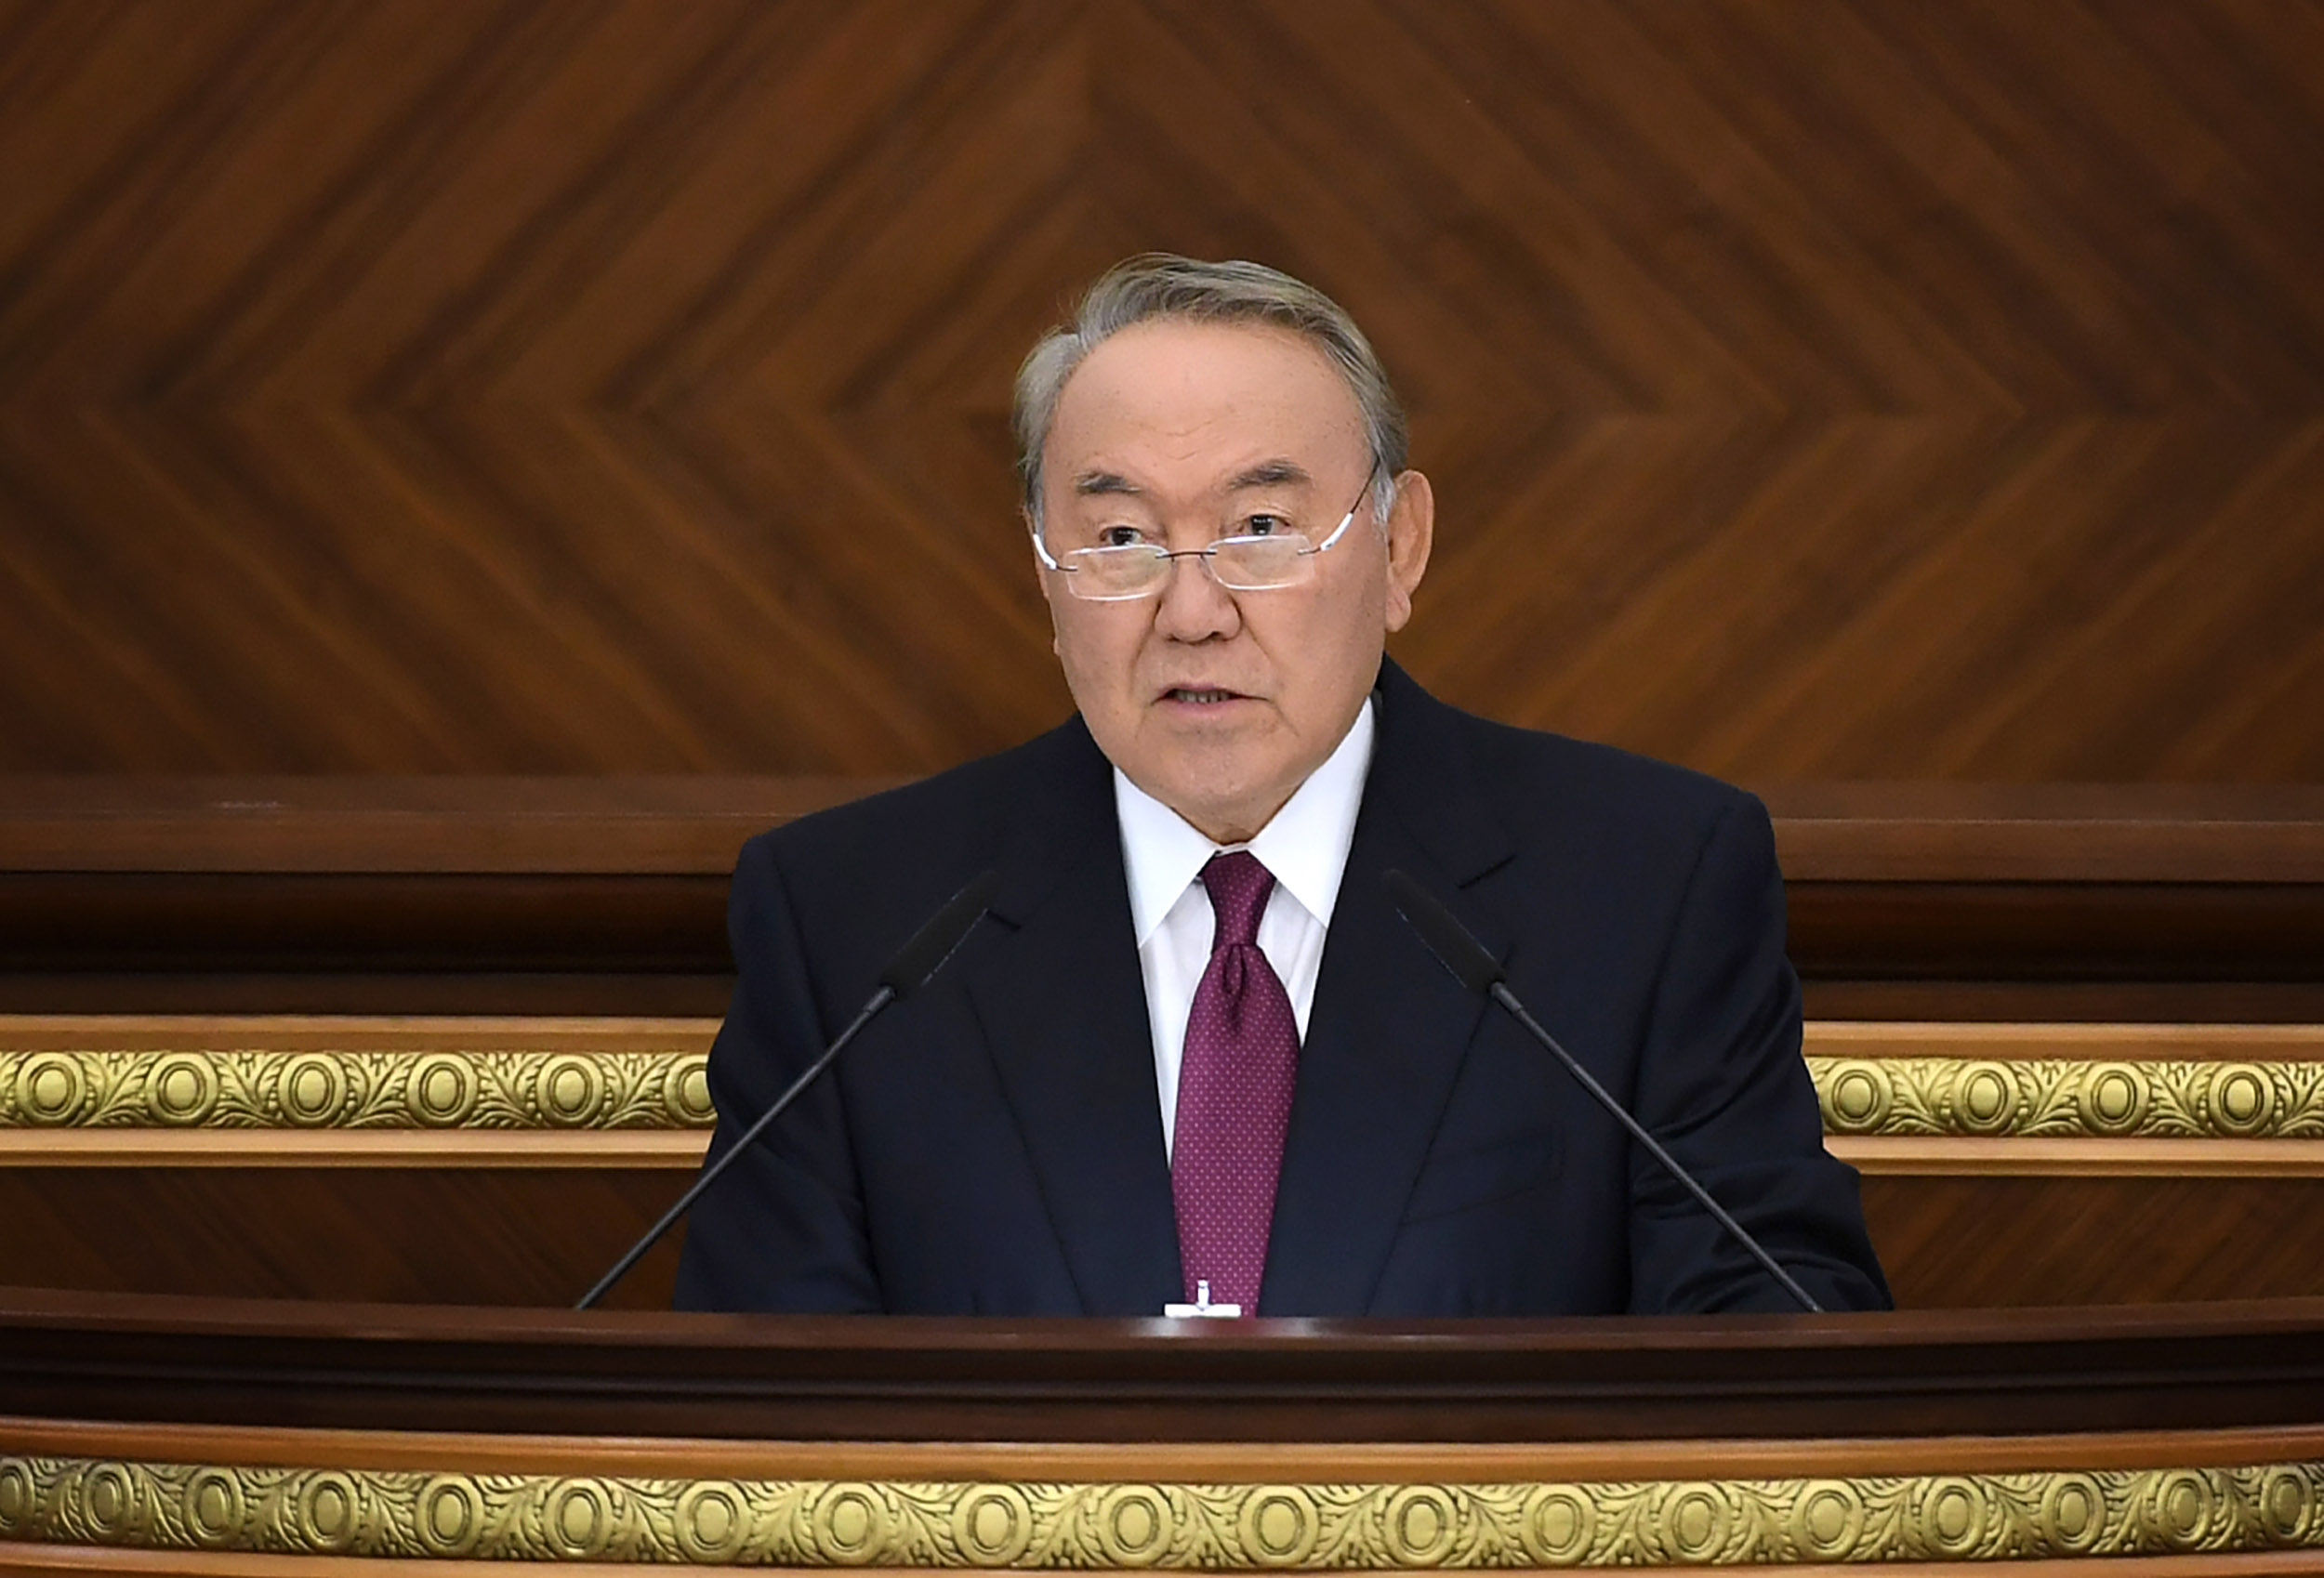 Kazakh President participates in the joint session of the Parliament Chambers